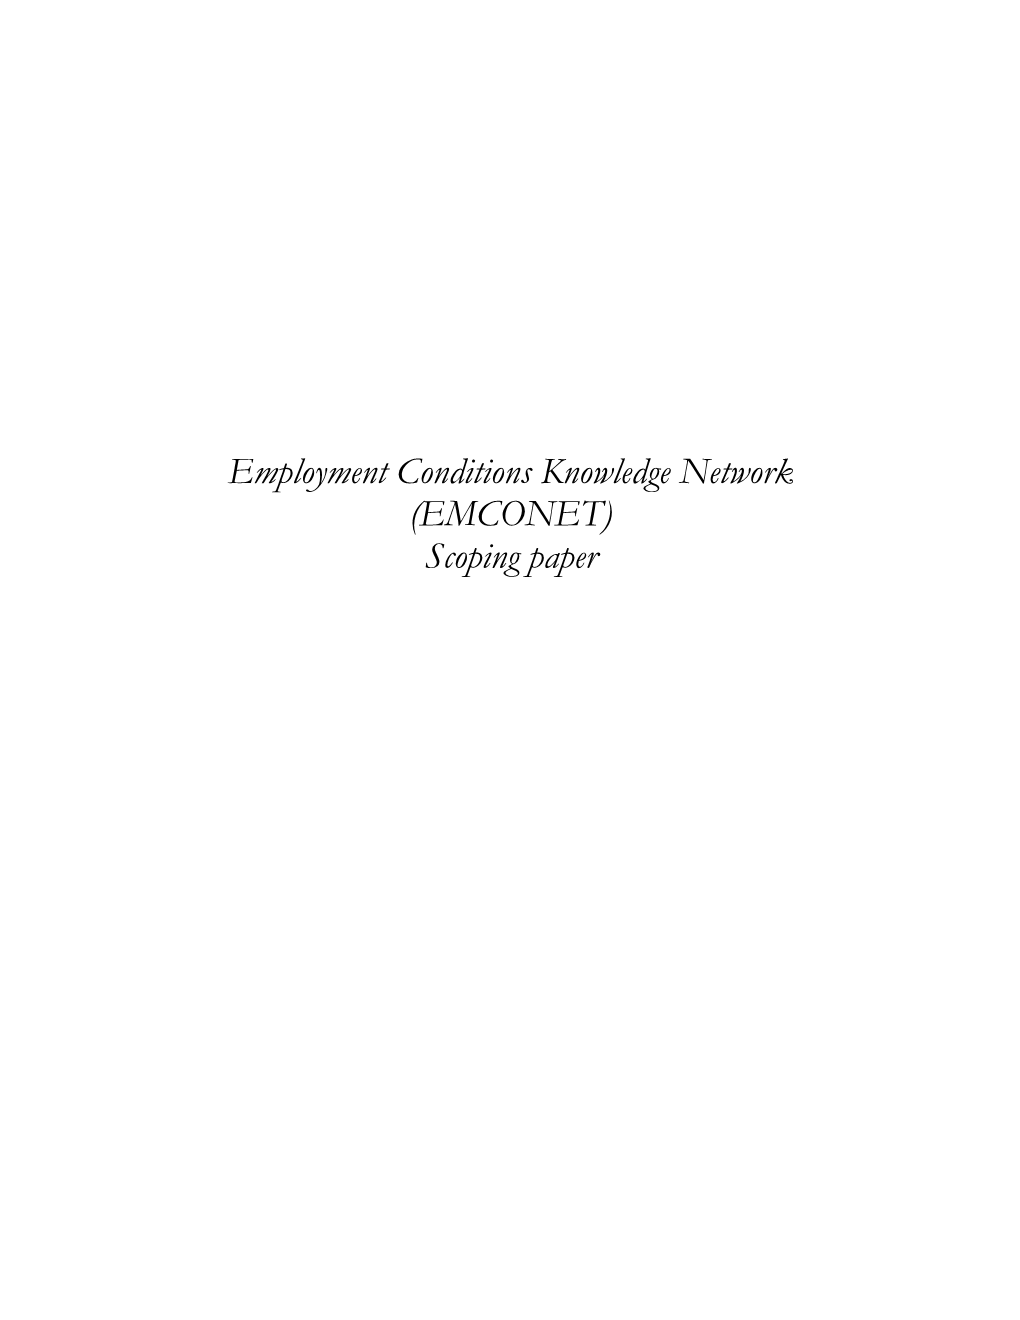 Employment Conditions Knowledge Network (EMCONET) Scoping Paper